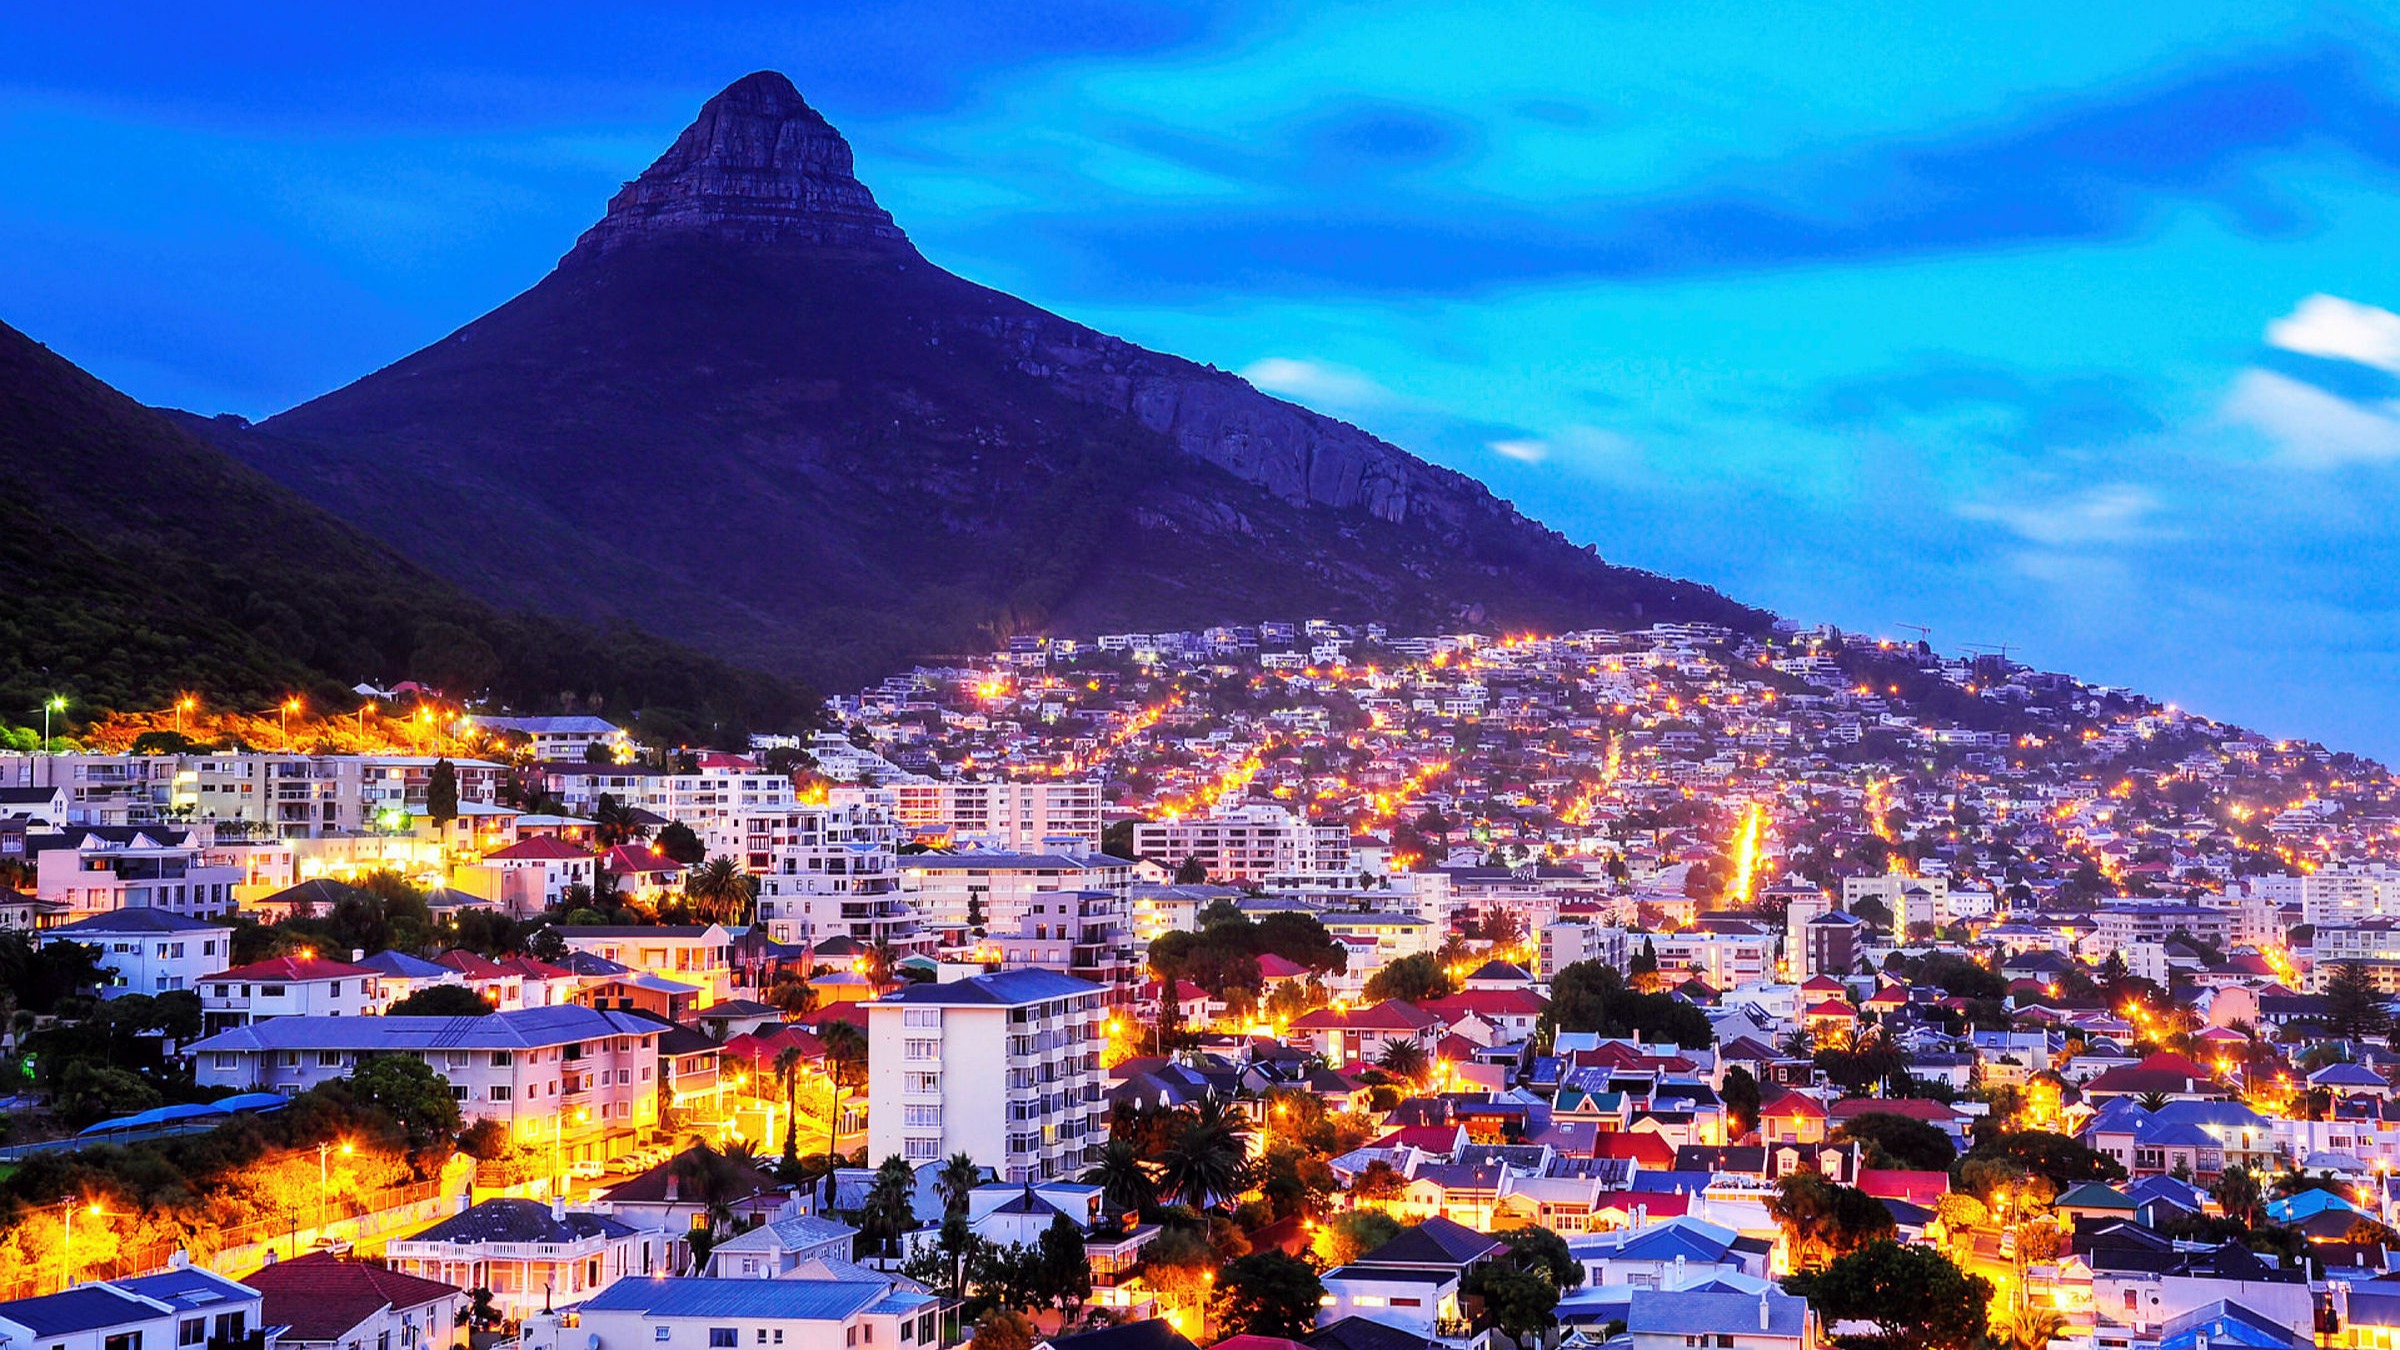 Cape Town at night [Photo: Courtesy]